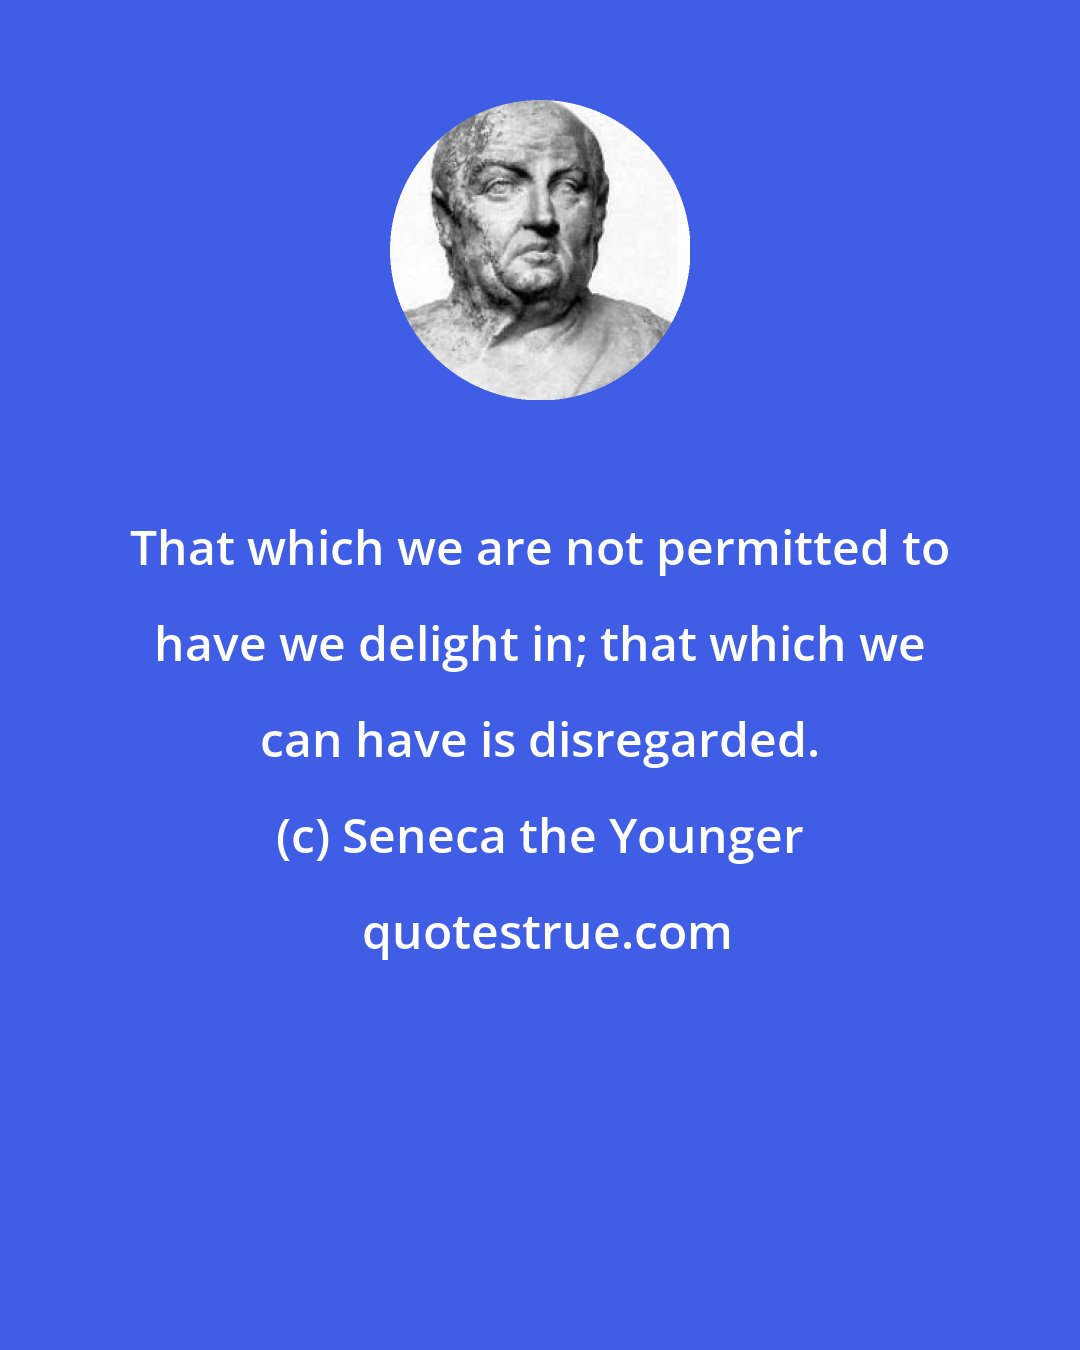 Seneca the Younger: That which we are not permitted to have we delight in; that which we can have is disregarded.